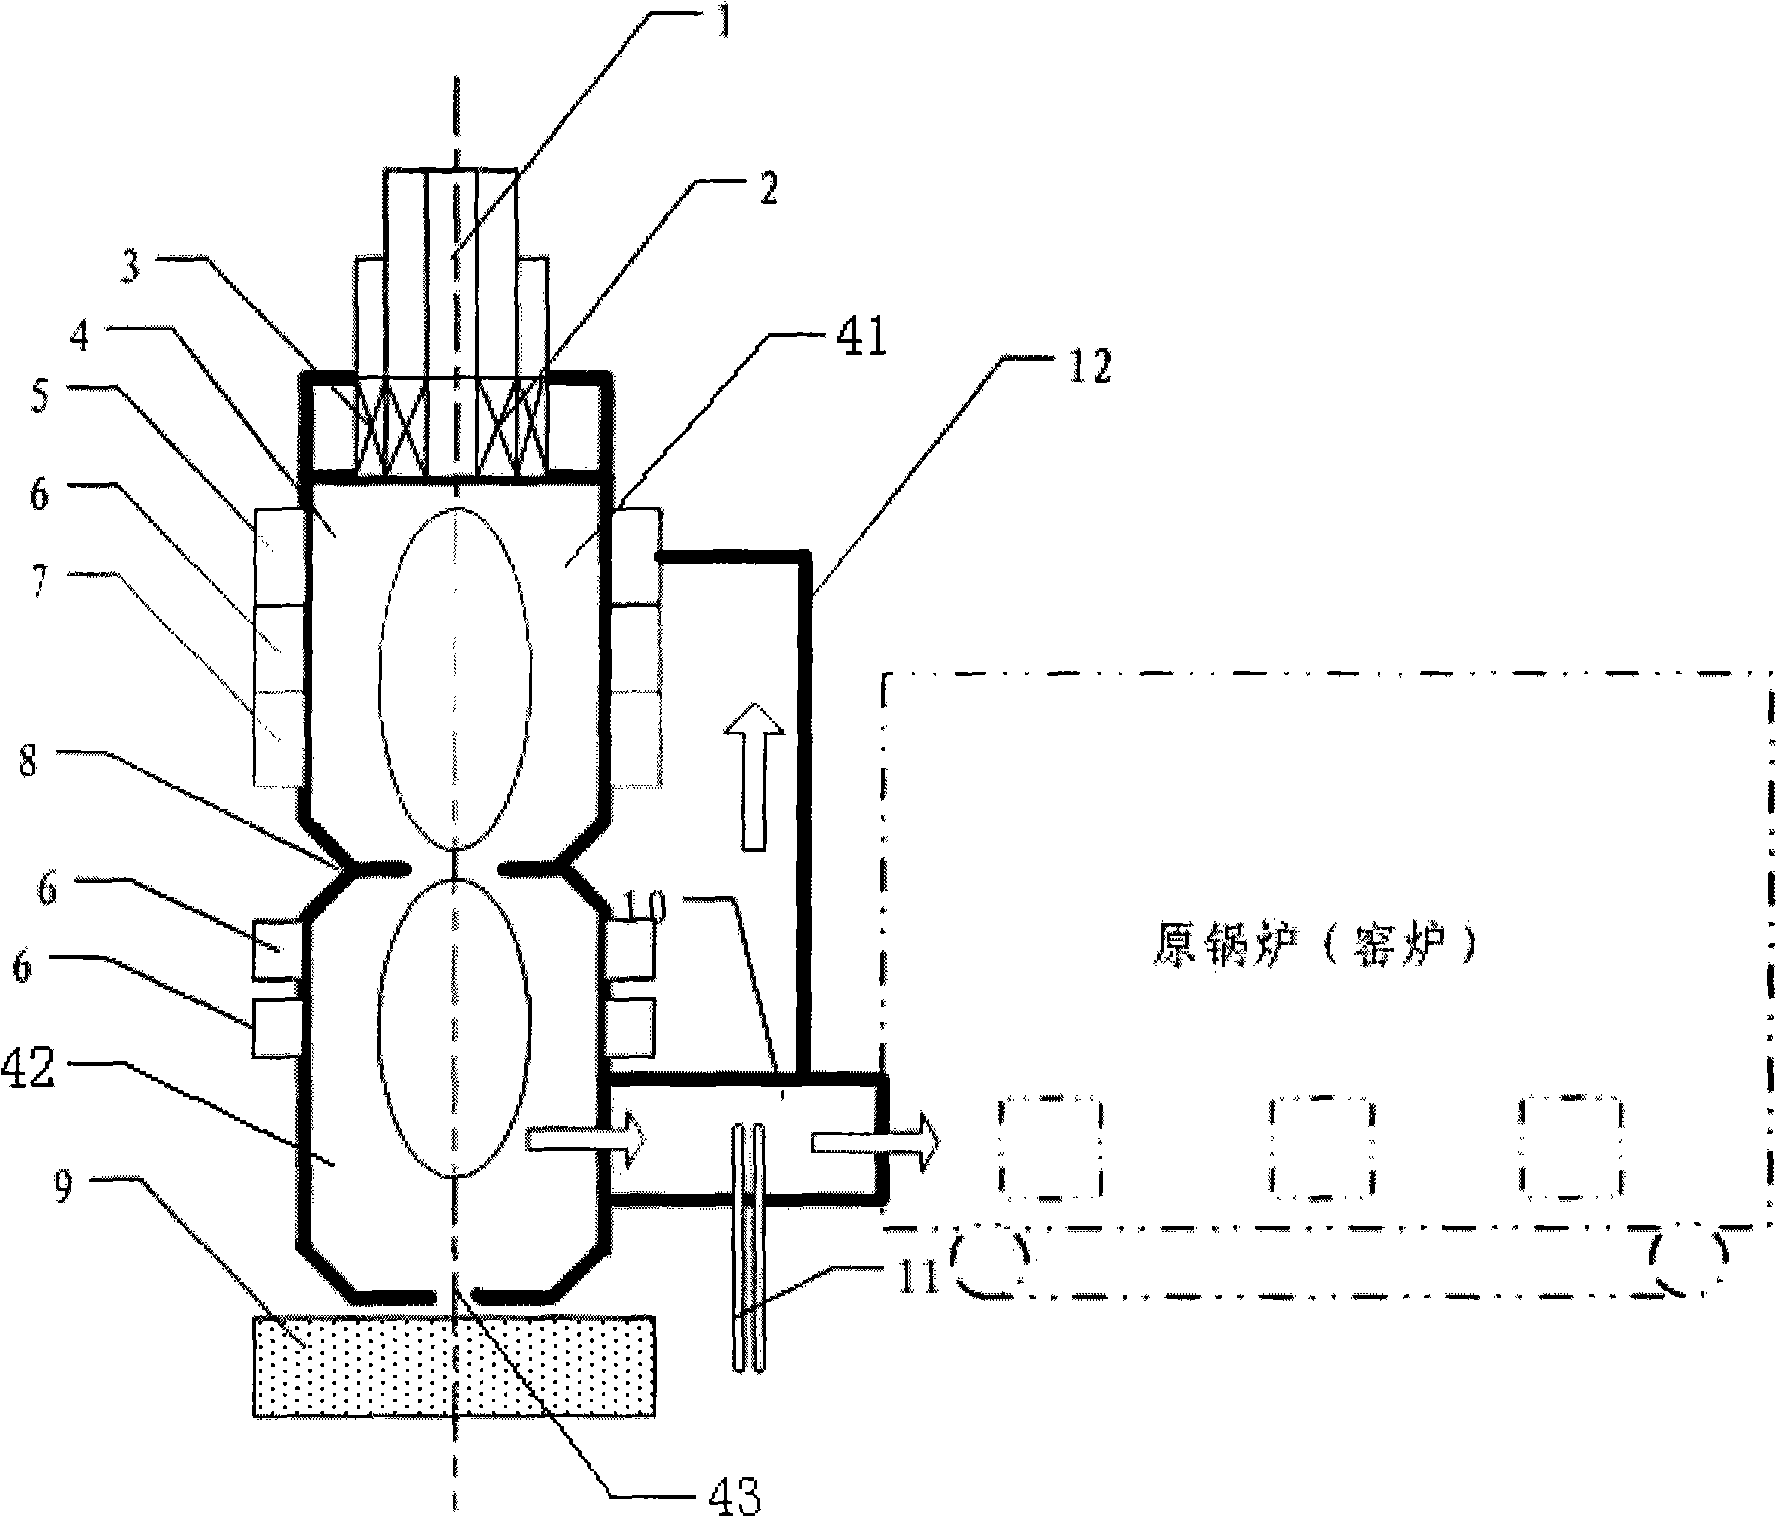 Modularized coal fines cleaning combustion apparatus